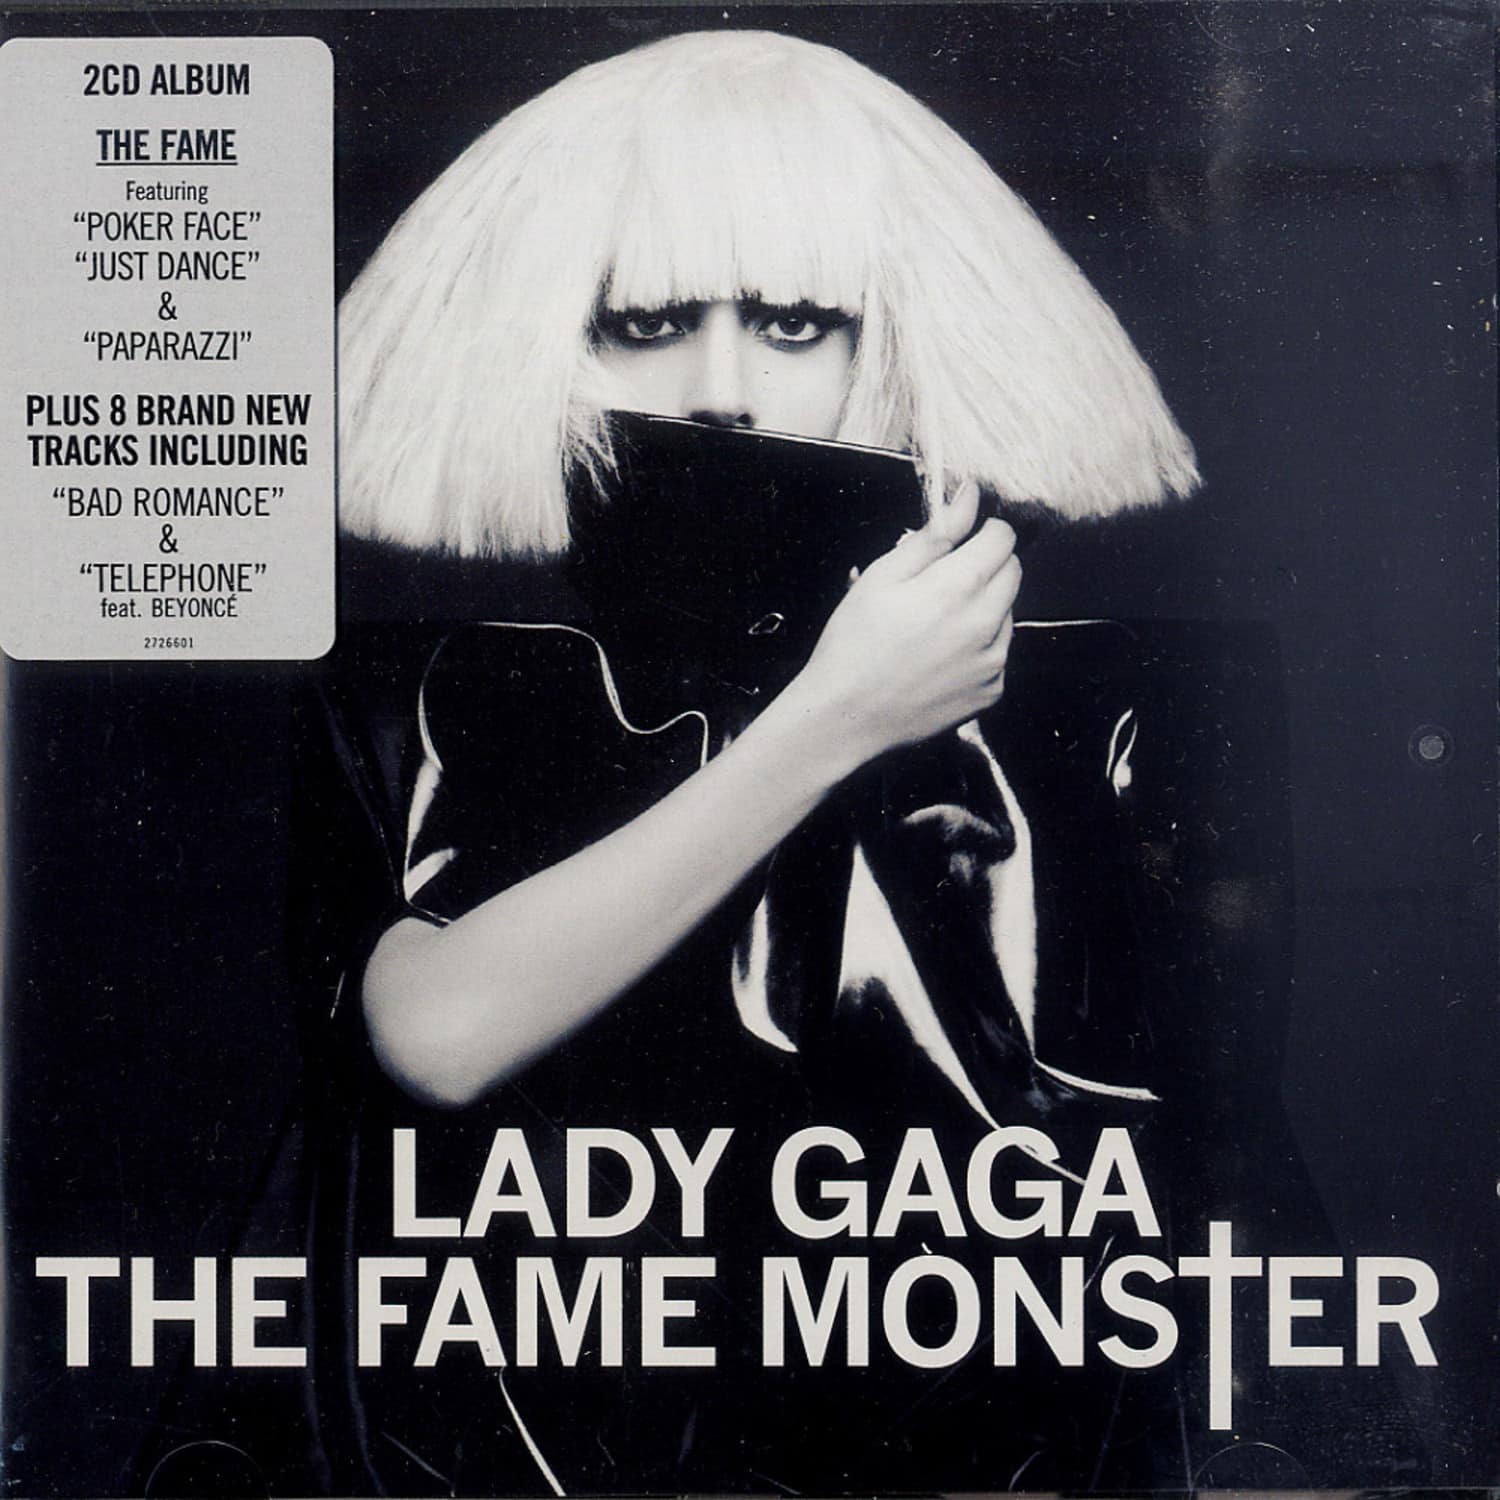 Lady Gaga - THE FAME MONSTER 